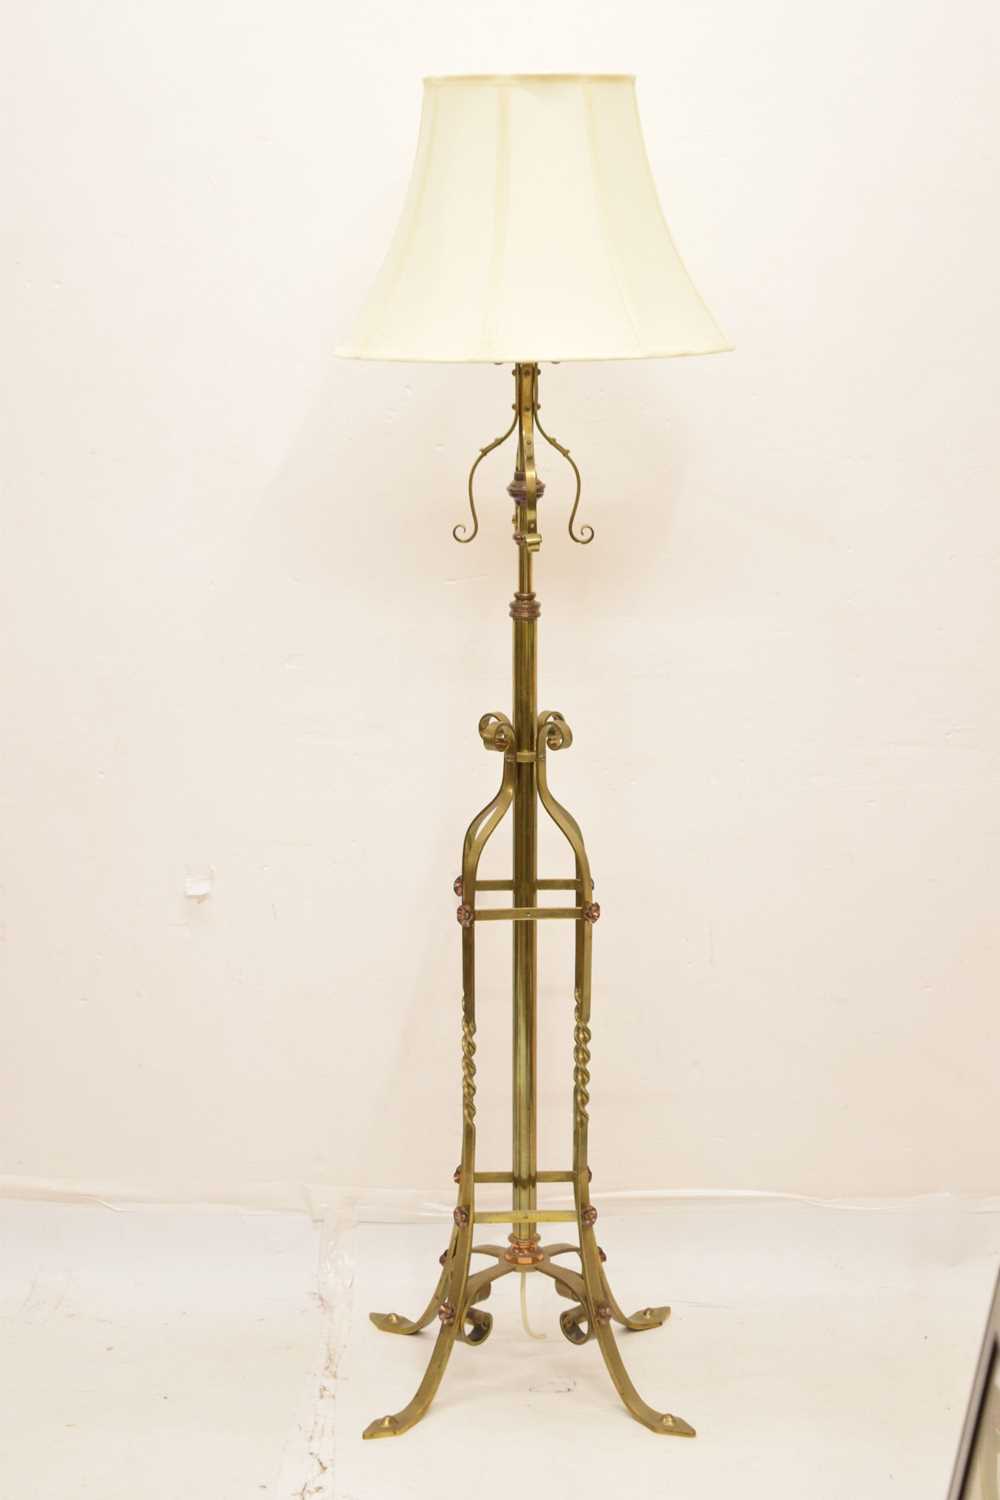 Early 20th century brass standard lamp - Image 3 of 7